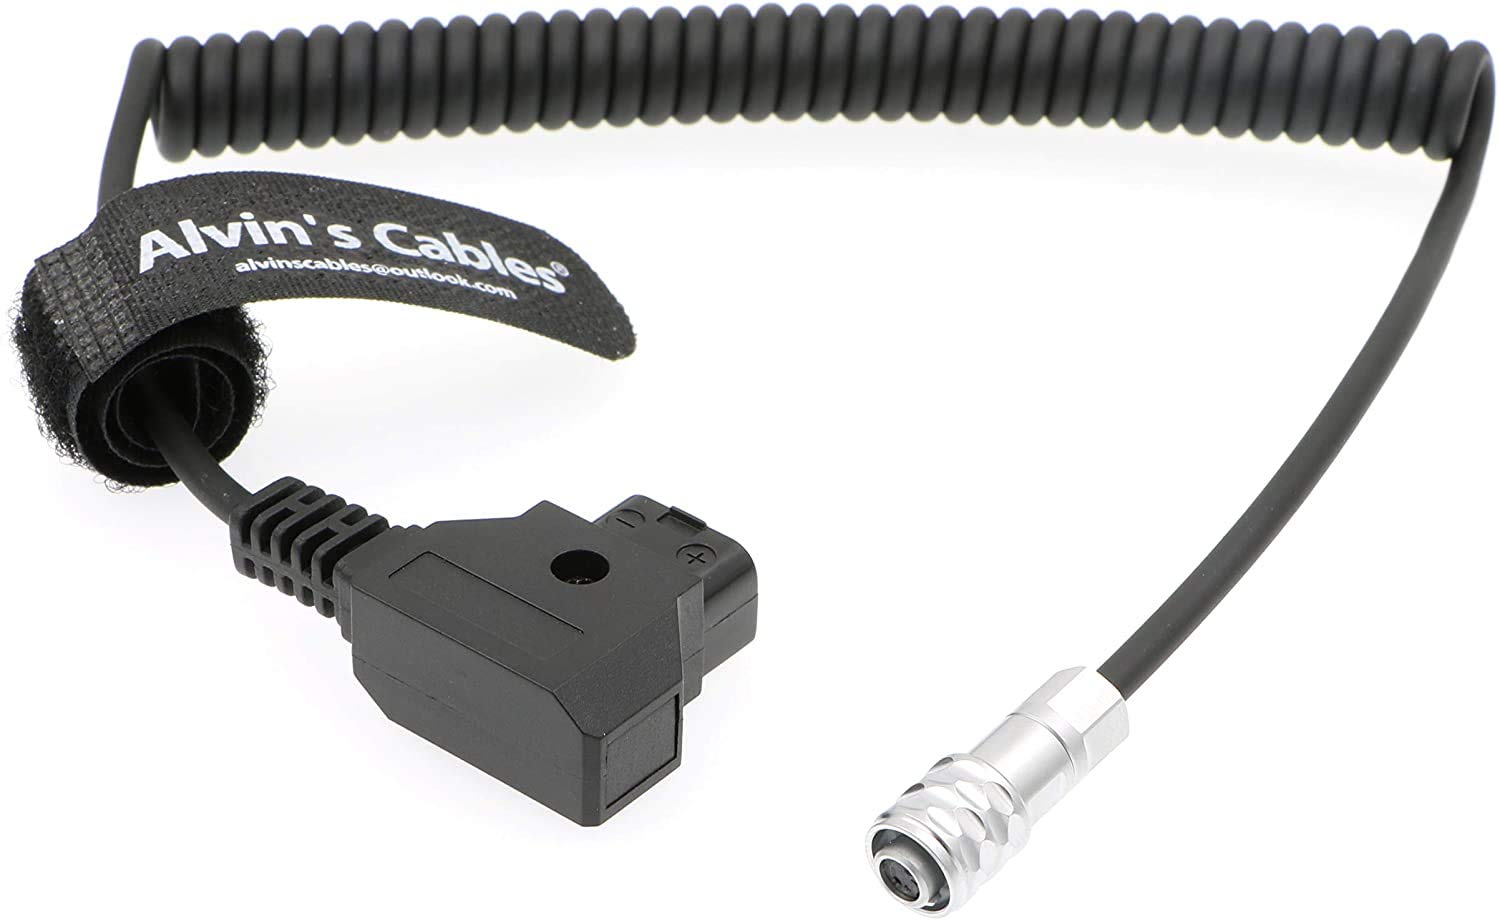 Alvin's Cables BMPCC 4K 6K to D Tap Power Cable for Blackmagic Pocket Cinema Camera 4K| 6K Weipu 2 Pin Female to P Tap Coiled Cable